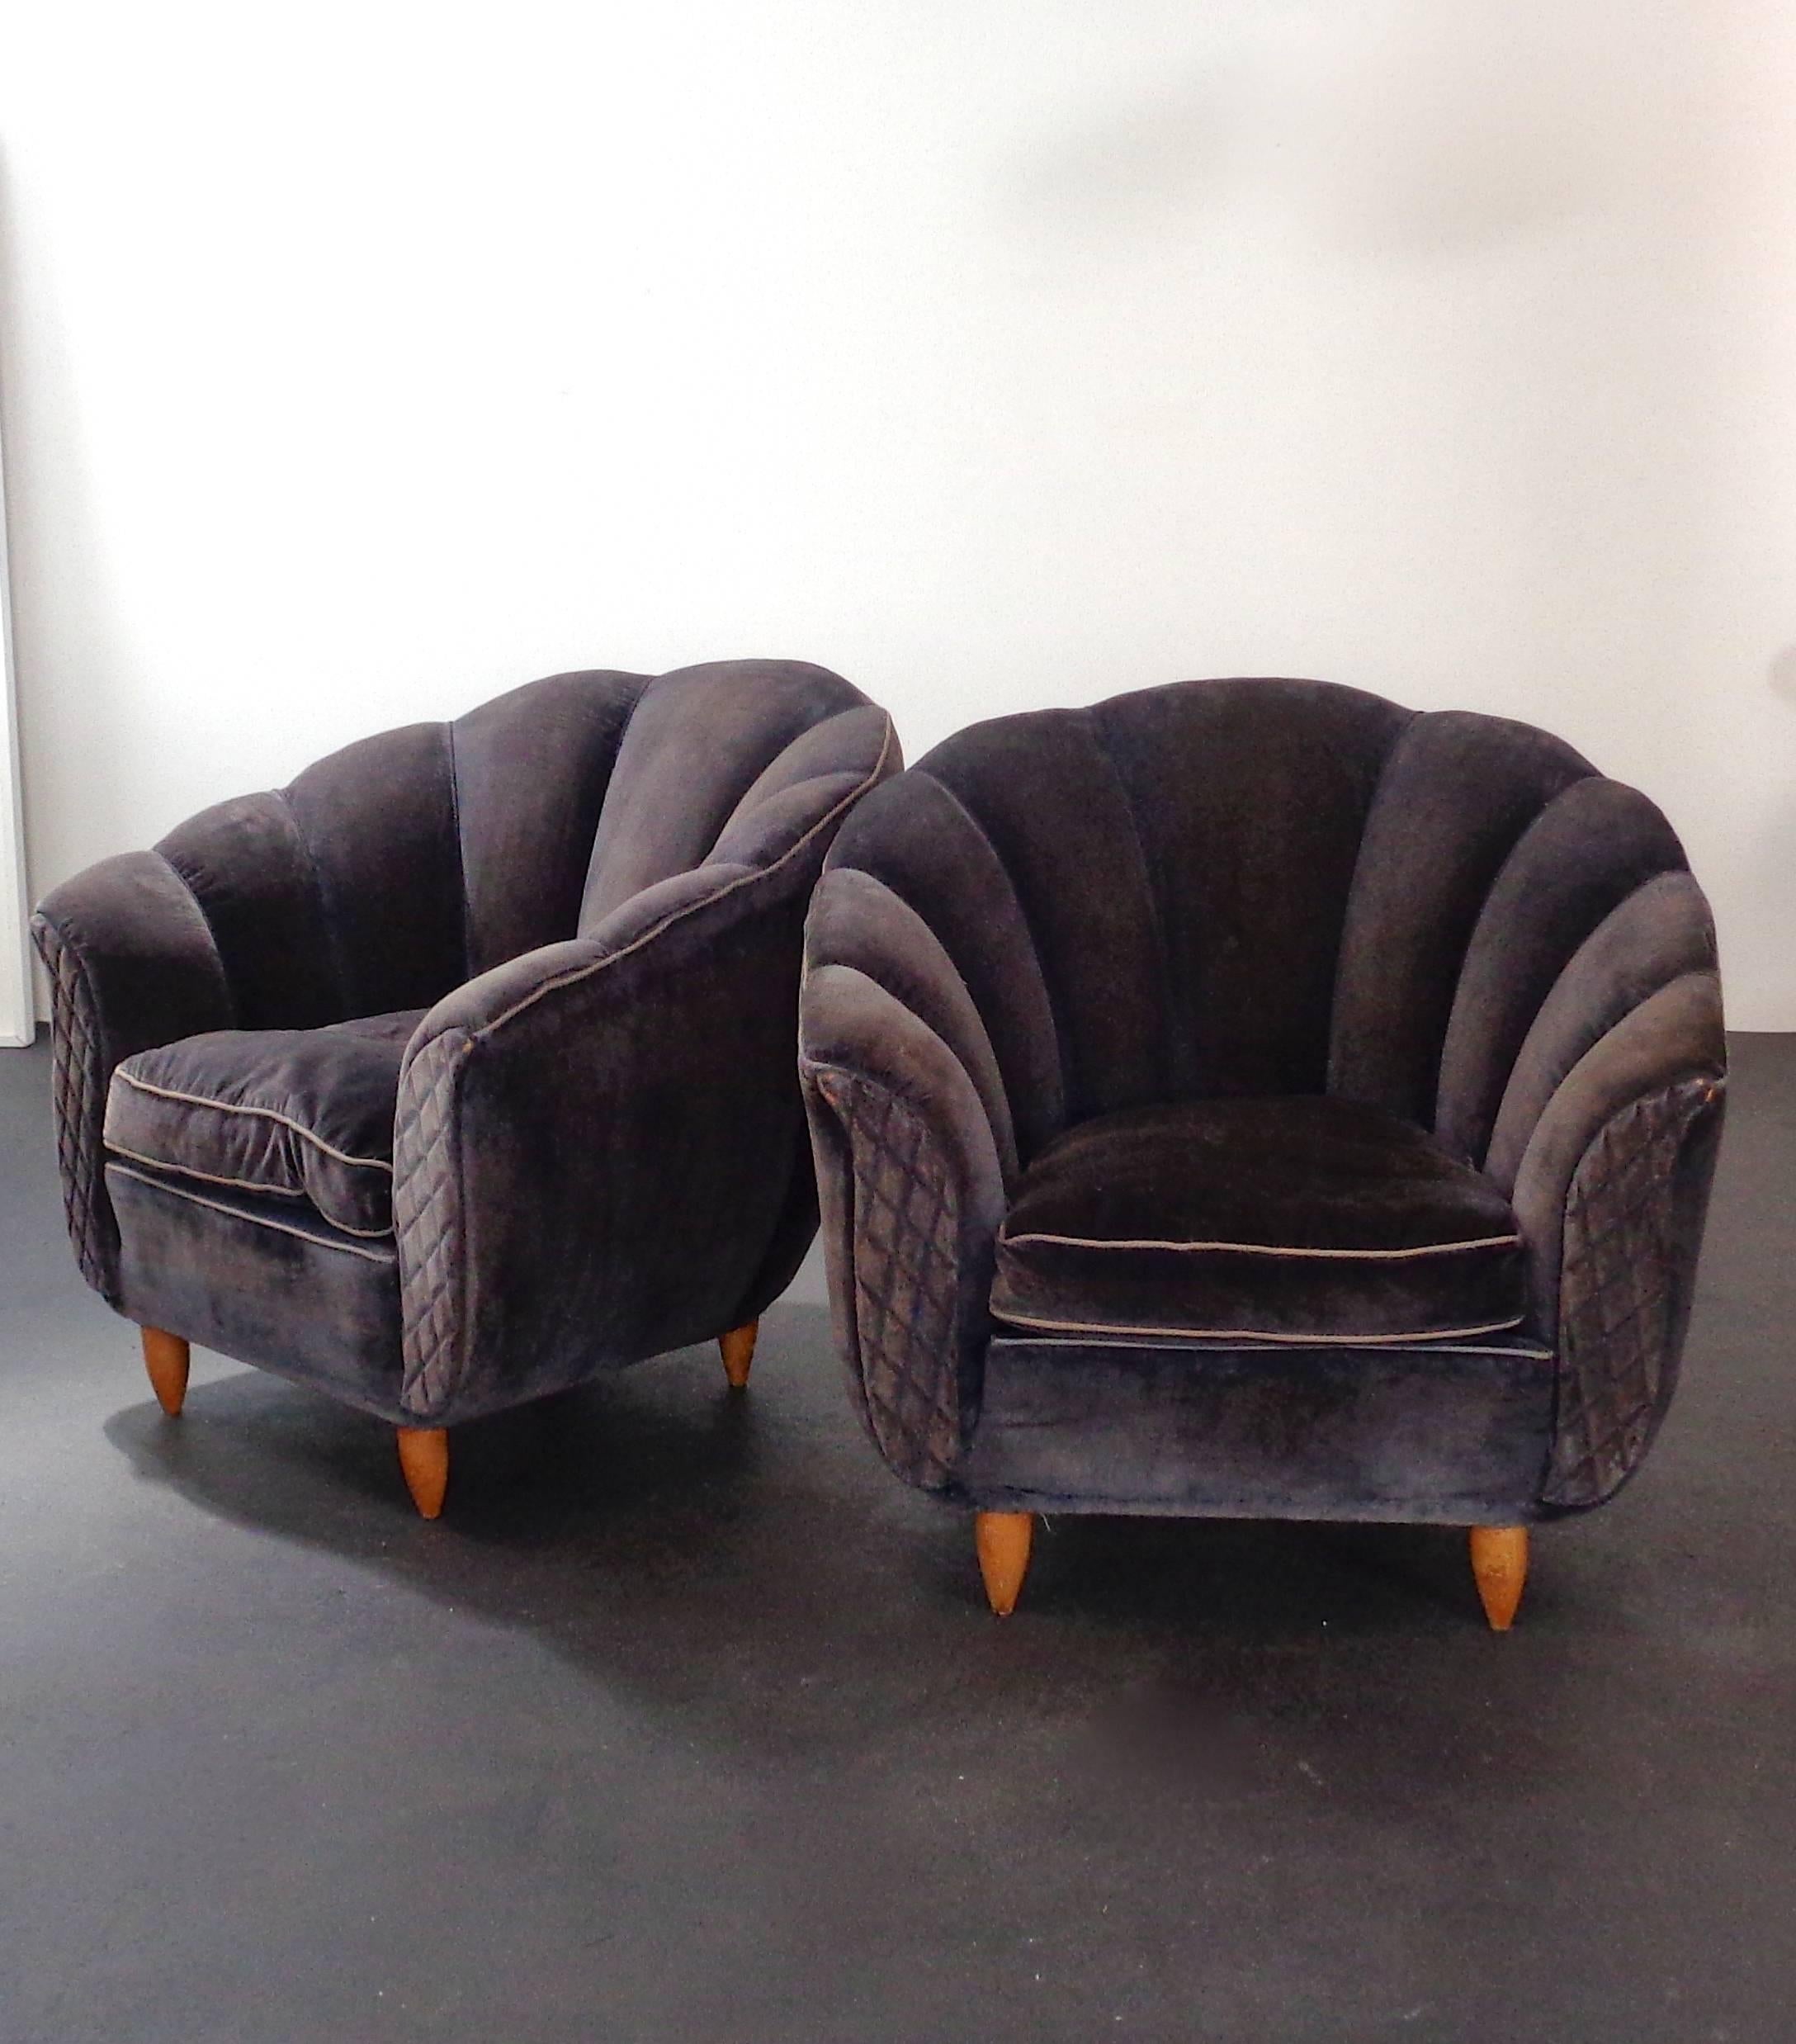 A pair of dark purple velvet coquille armchairs with wooden tapered feet and textured front of the wooden armrests.
Original fabric.